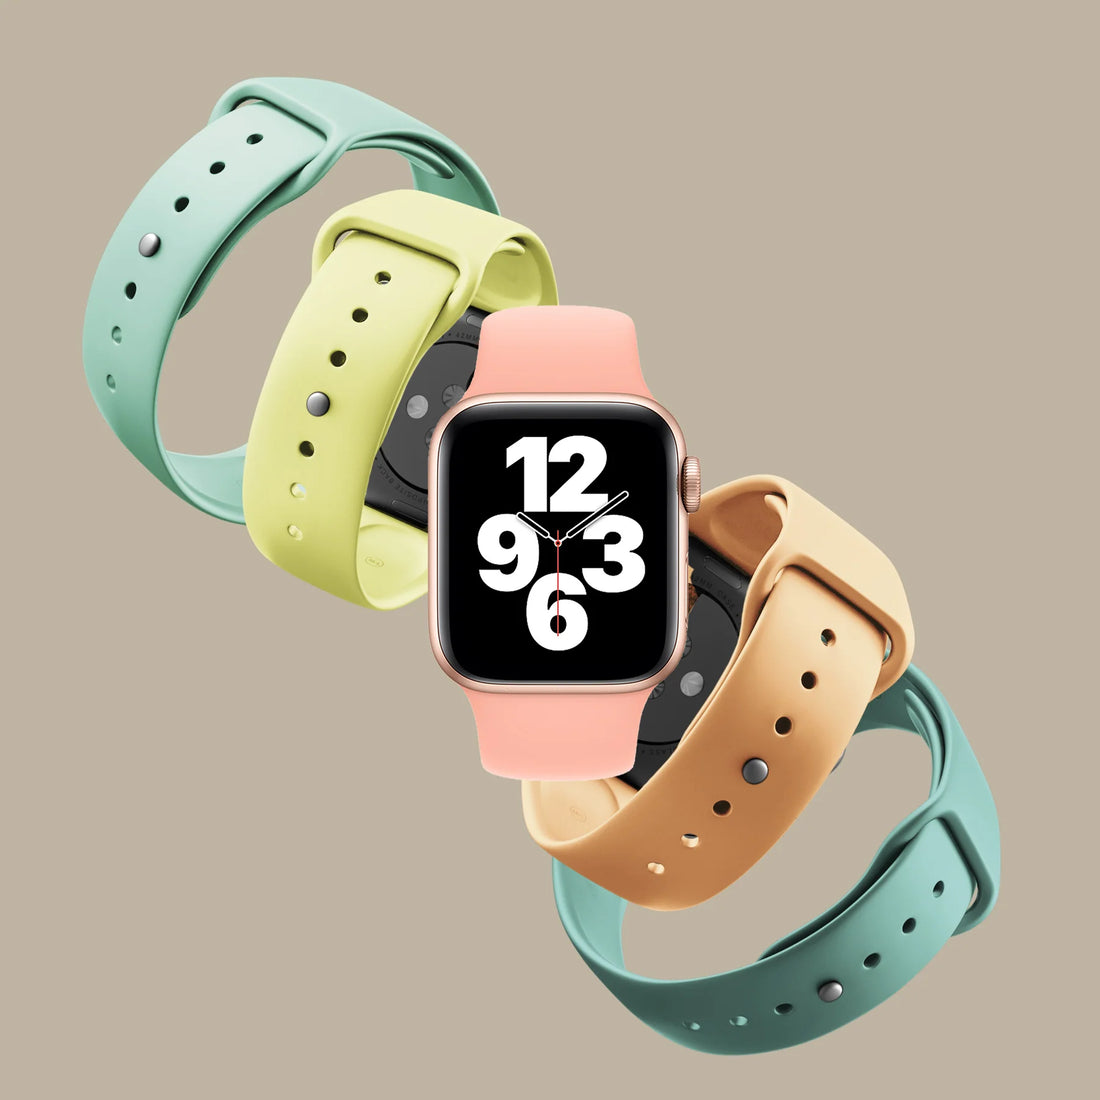 All You Need to Know About Apple 's Silicone Watch Straps